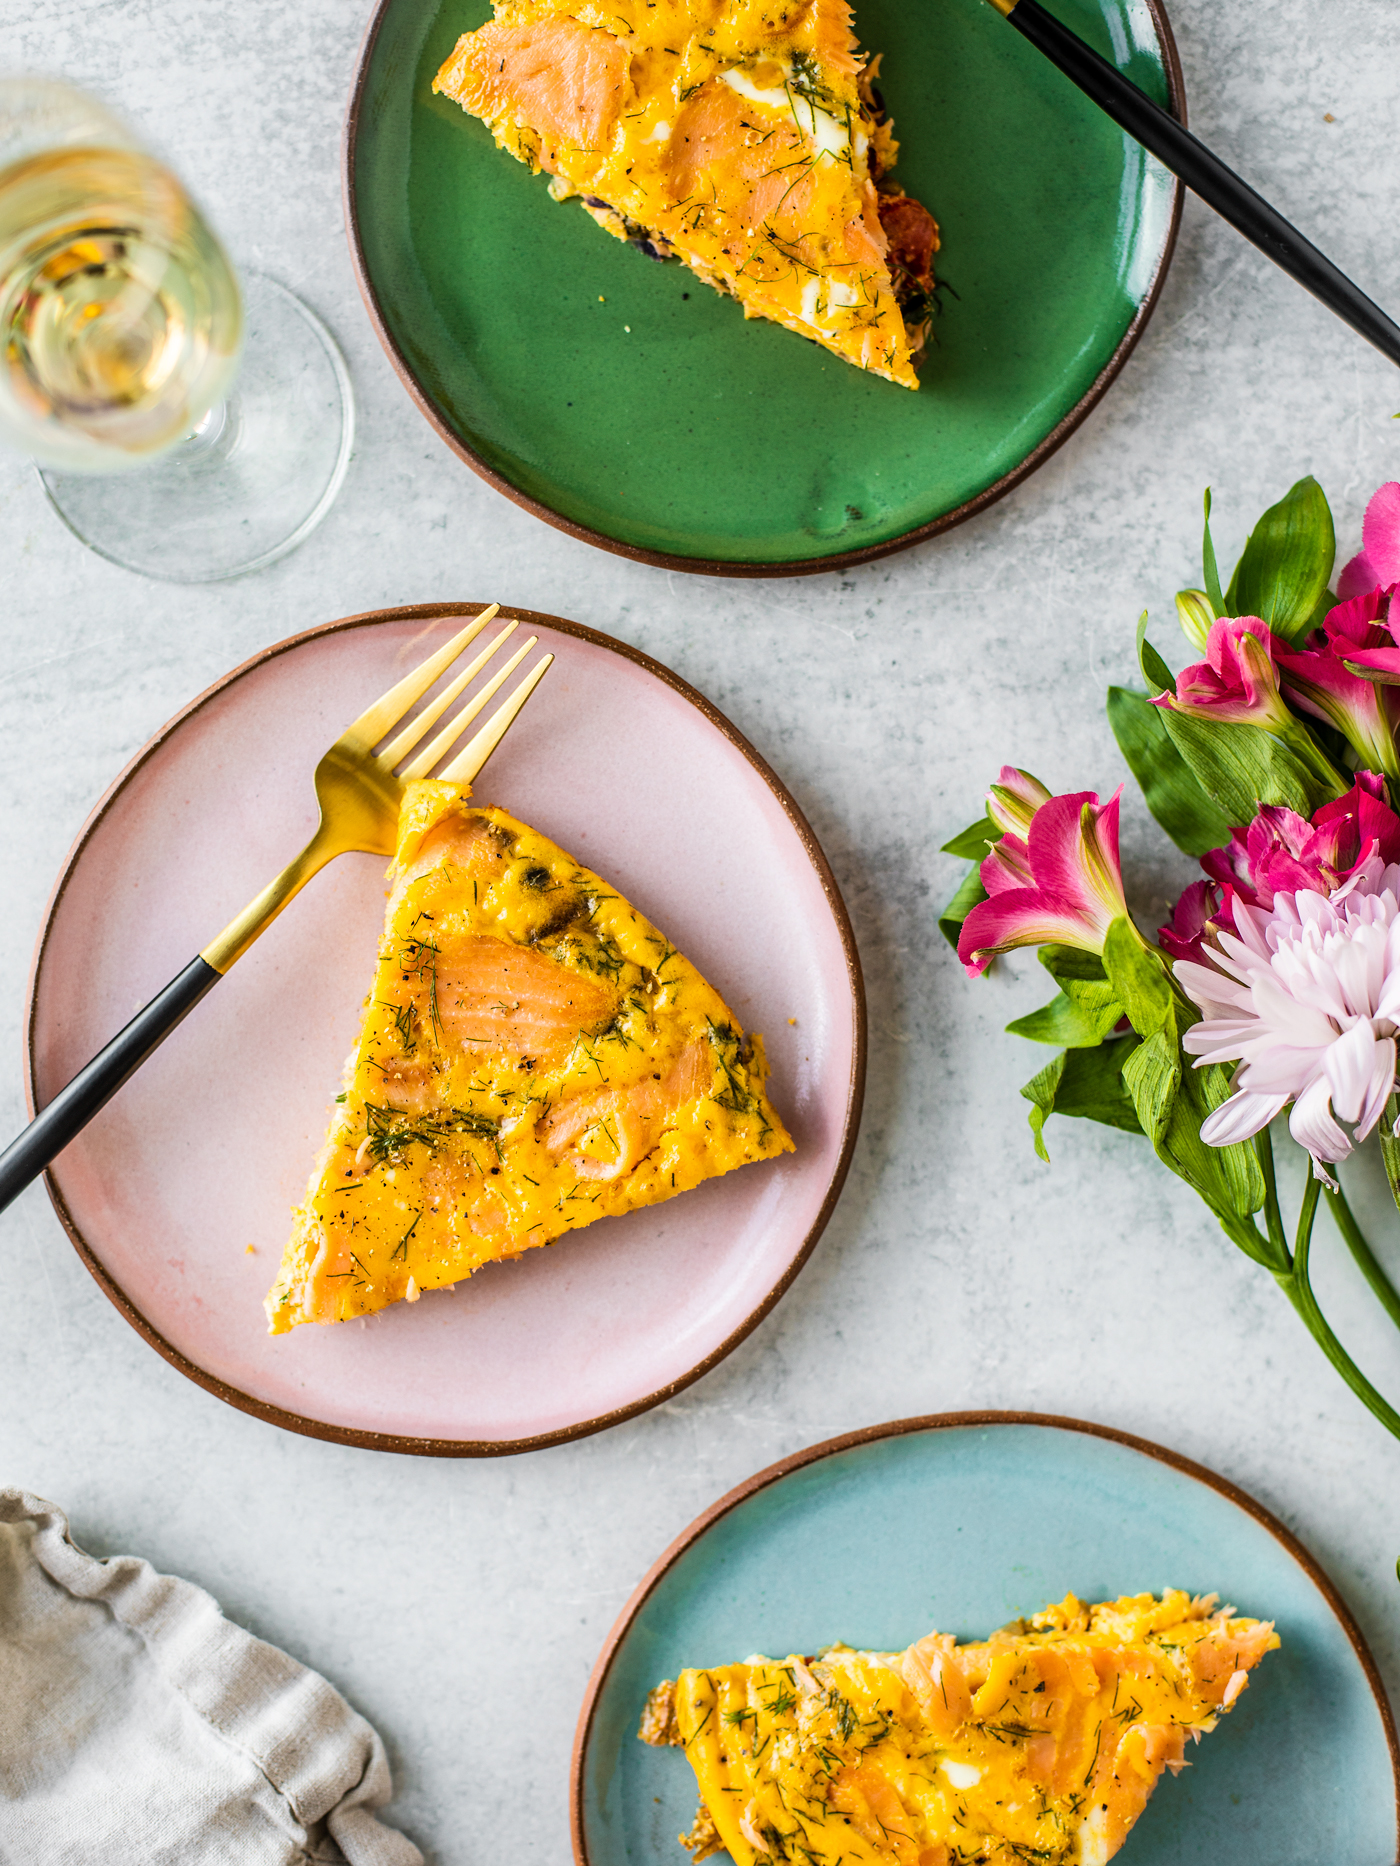 Slices of quiche on colorful pottery plates with flowers and a glass of champagne.